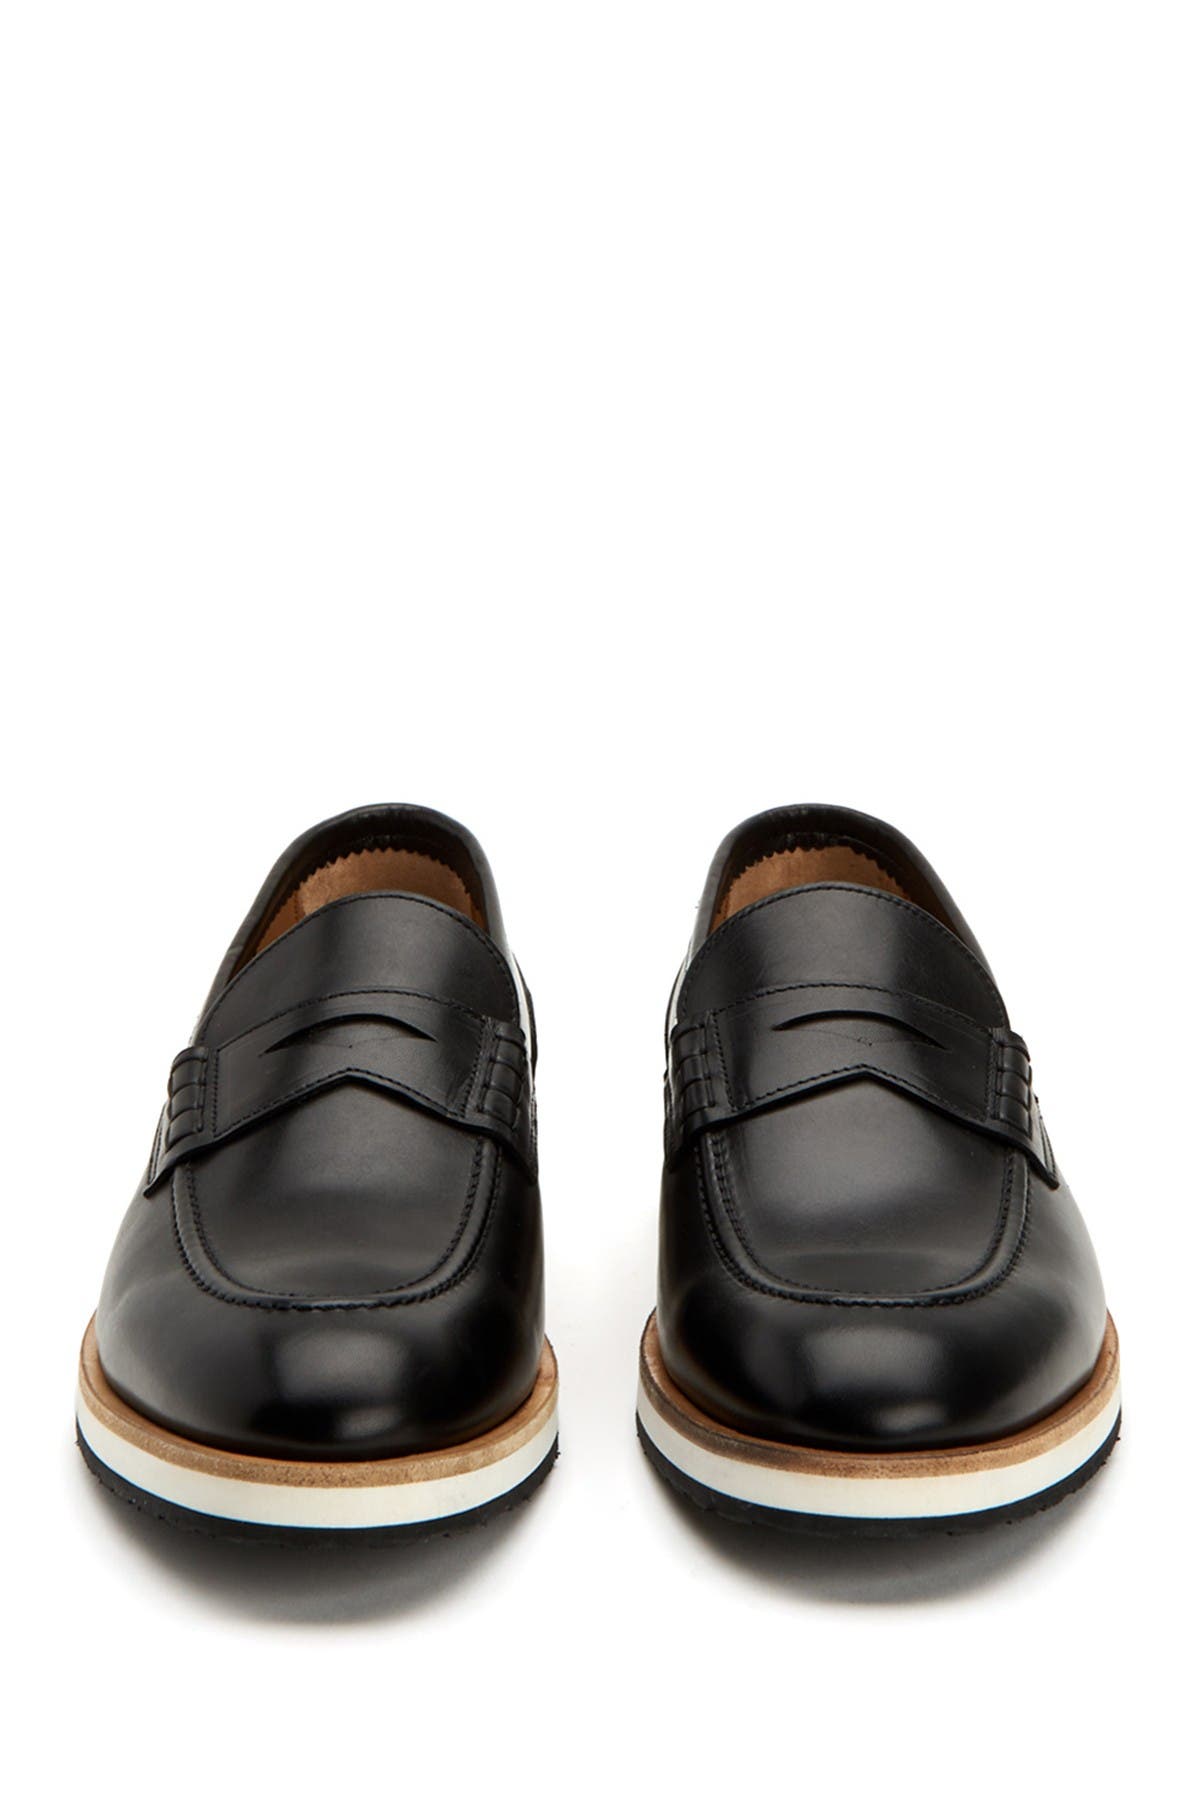 Aquatalia | Pearson Leather Penny Loafer | Nordstrom Rack